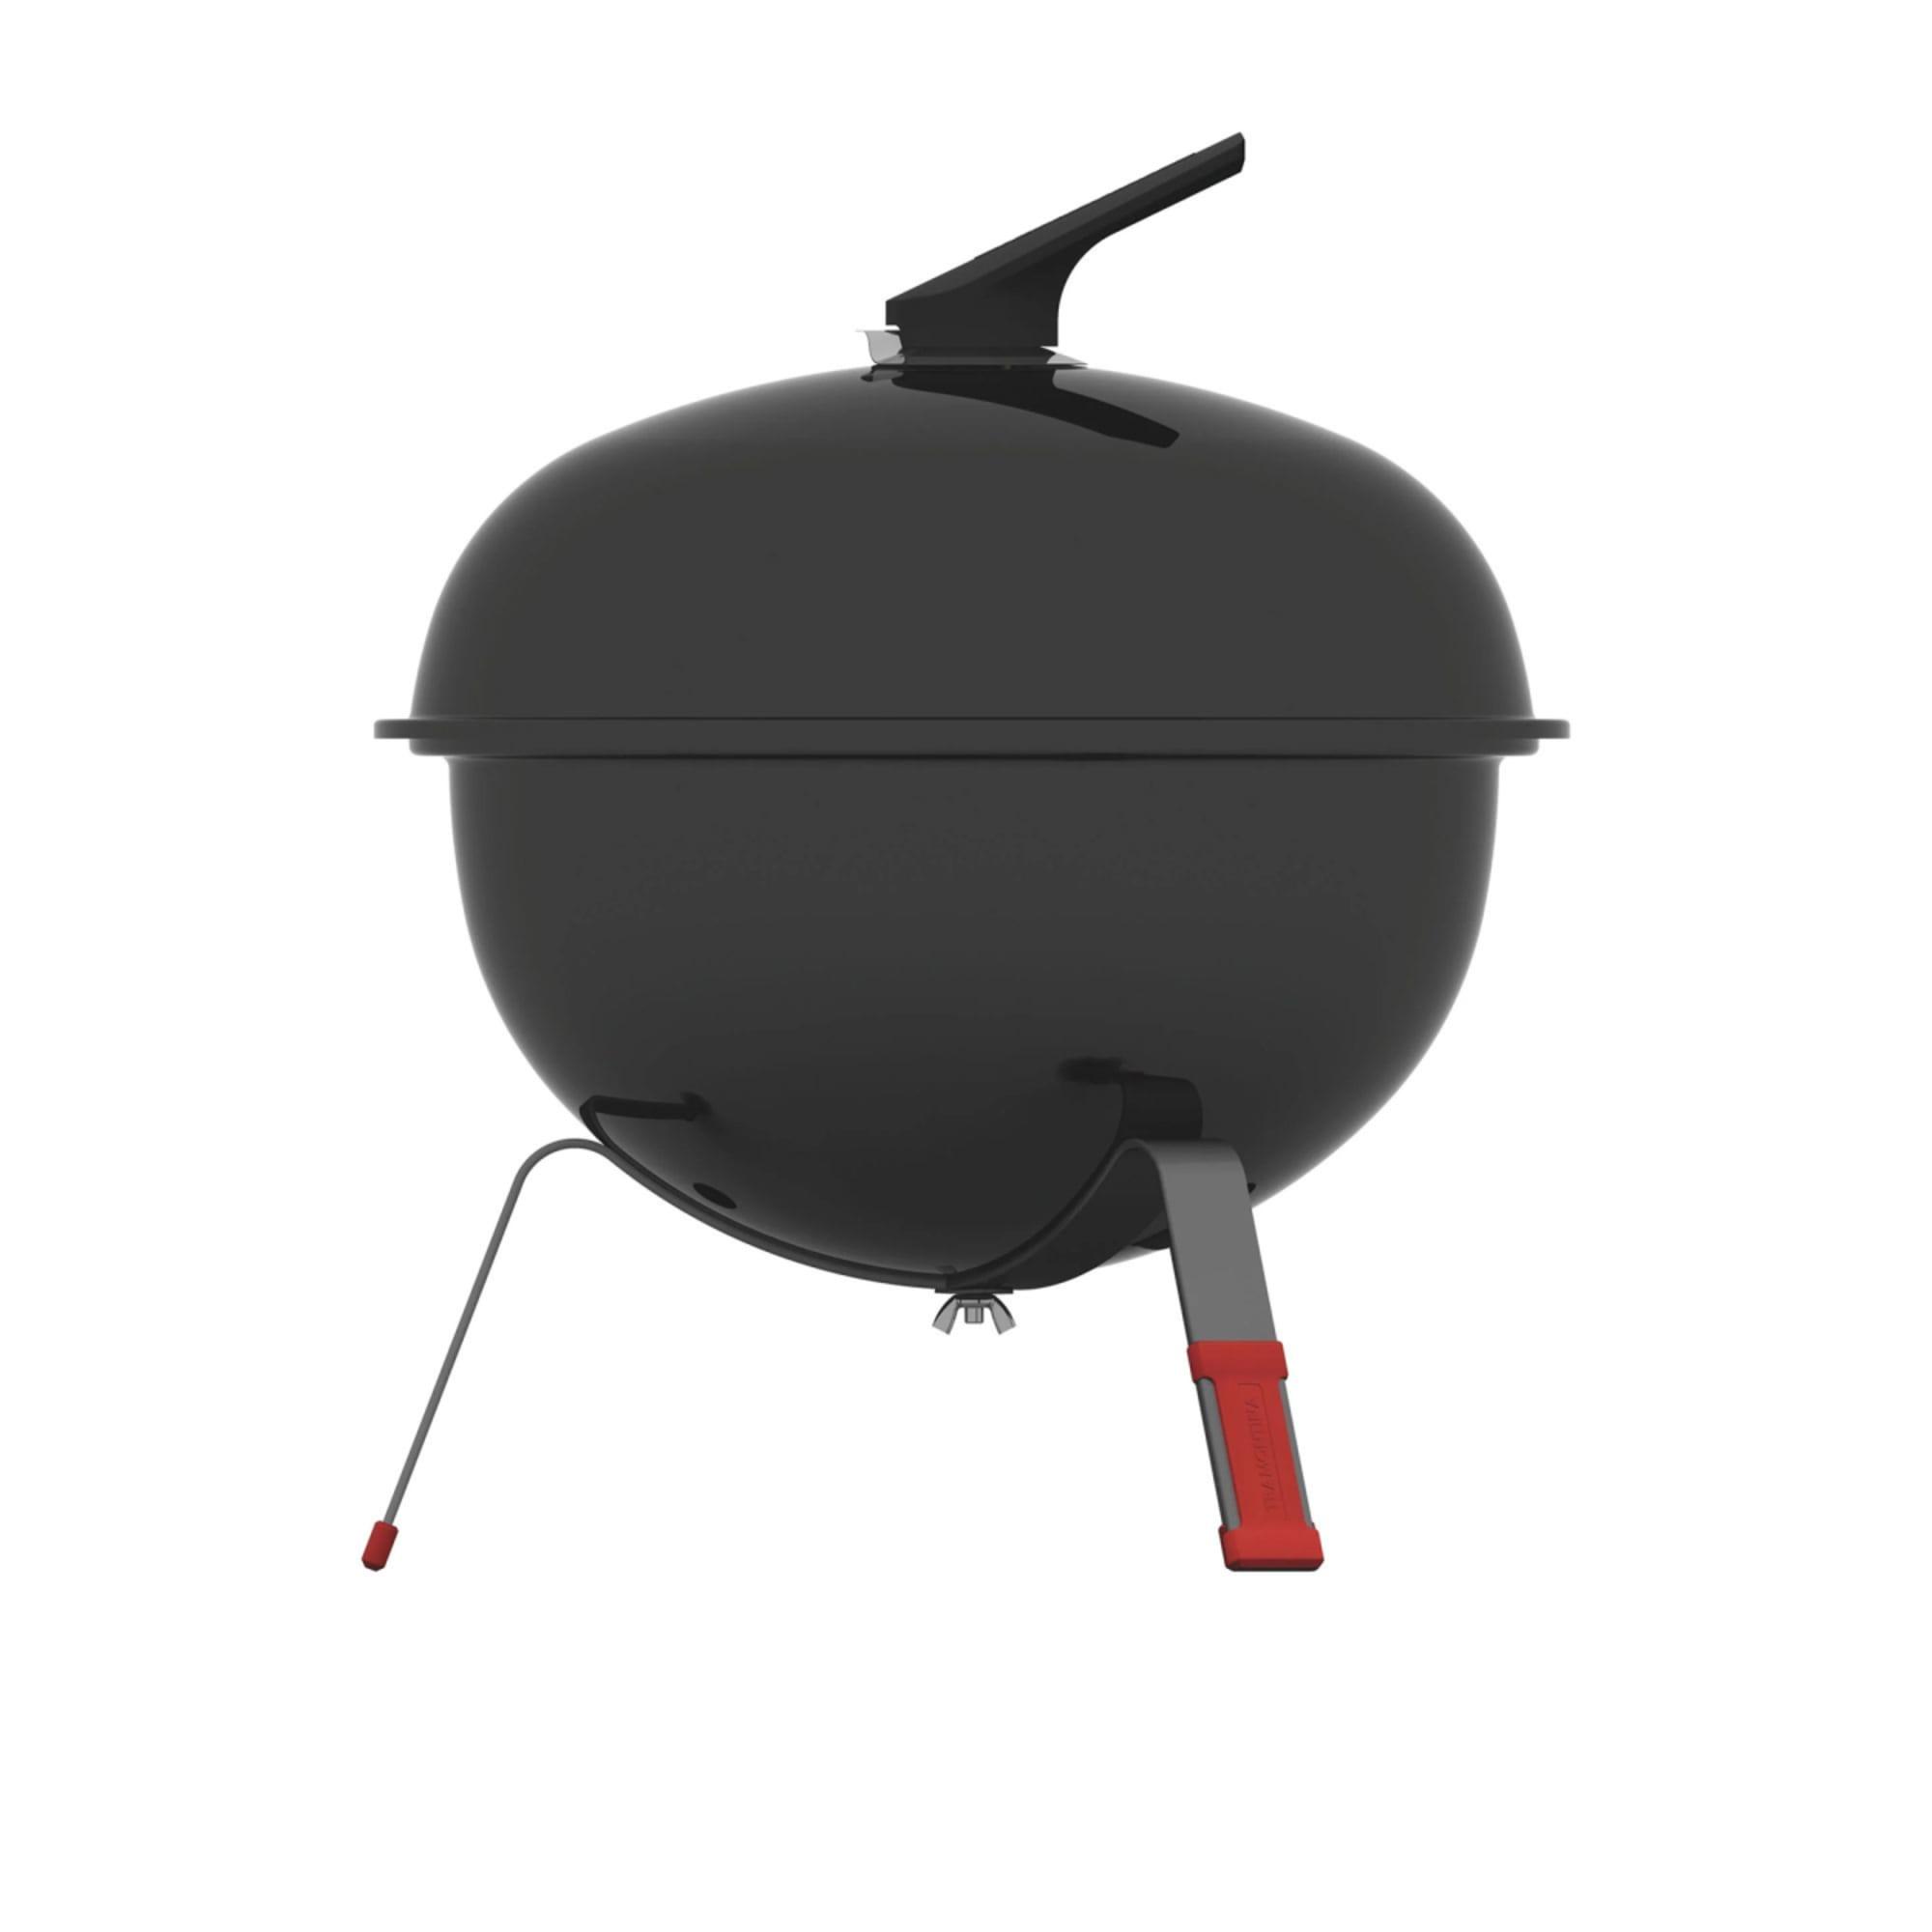 Tramontina Churrasco Charcoal Barbecue Grill Image 5